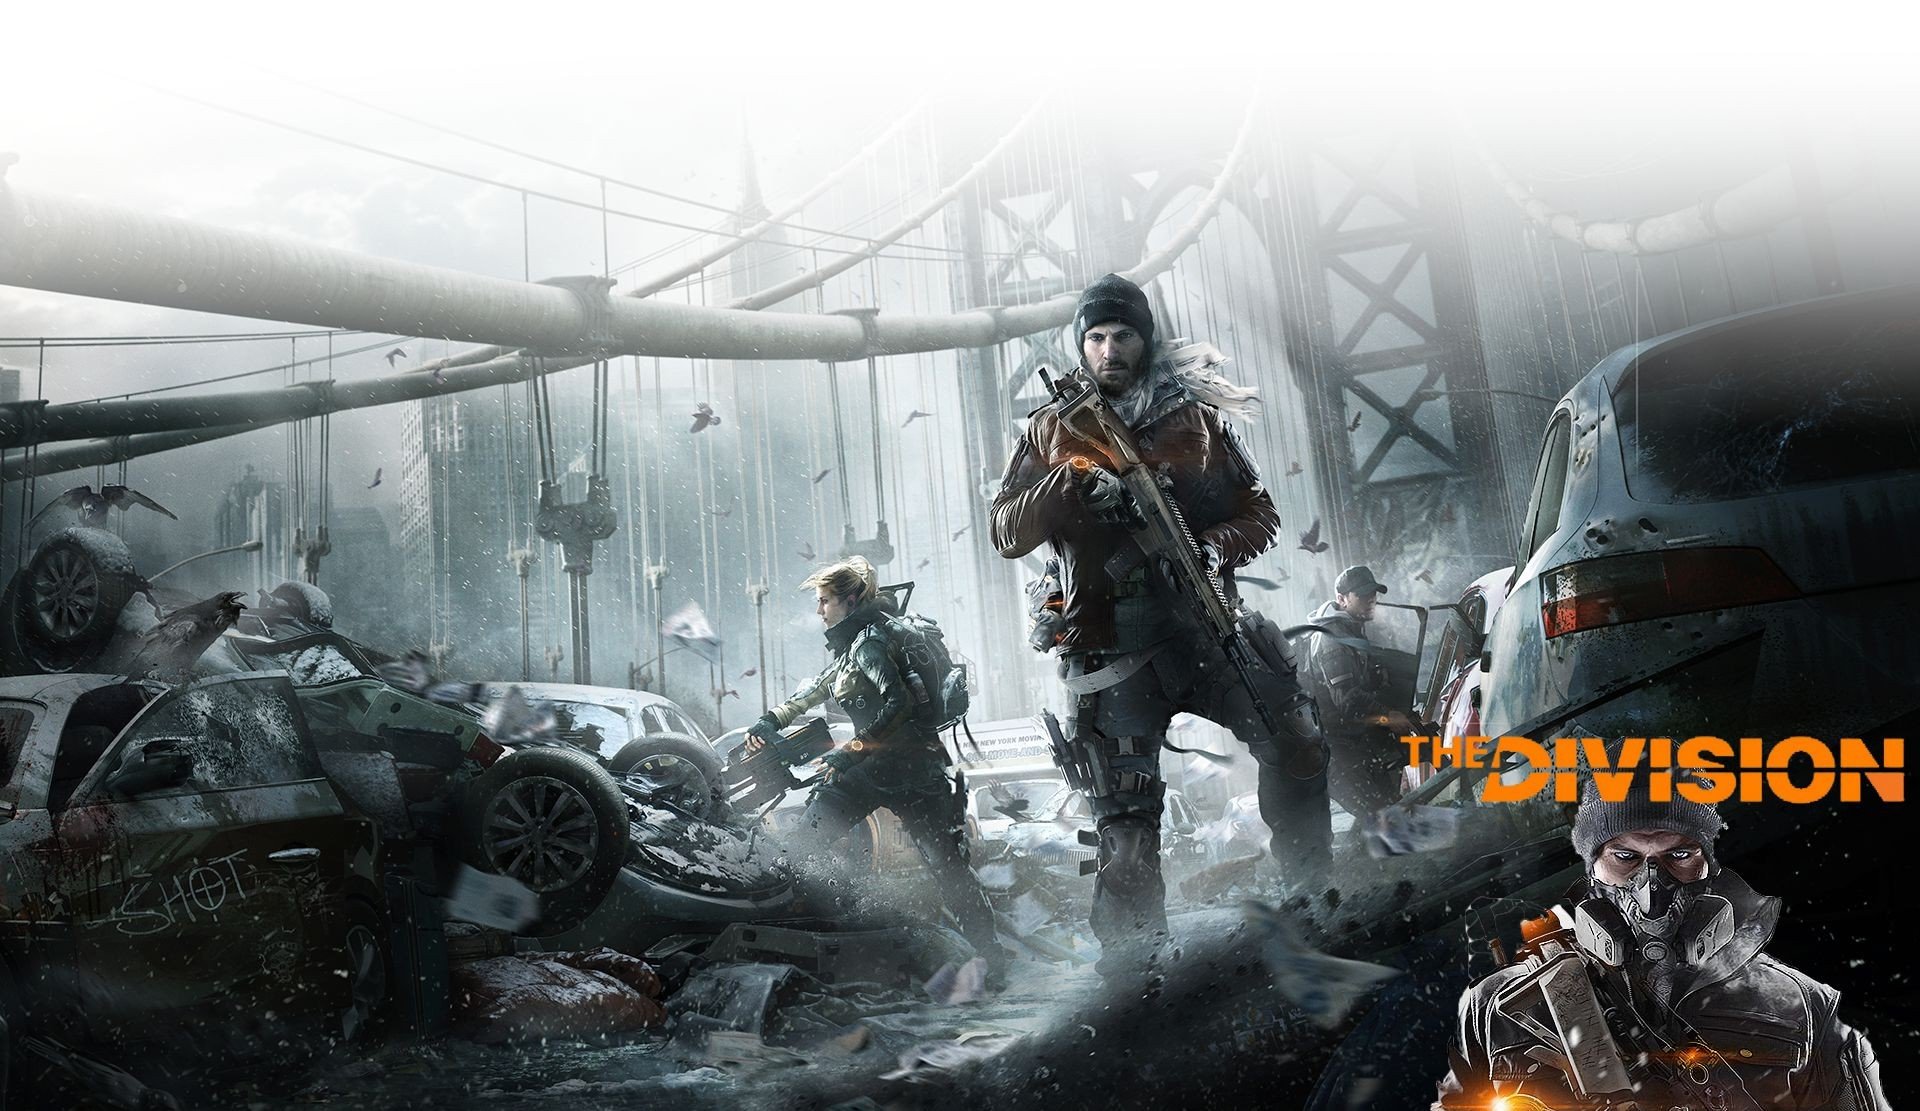 Tom Clancy&039;s The Division, Video games Wallpaper